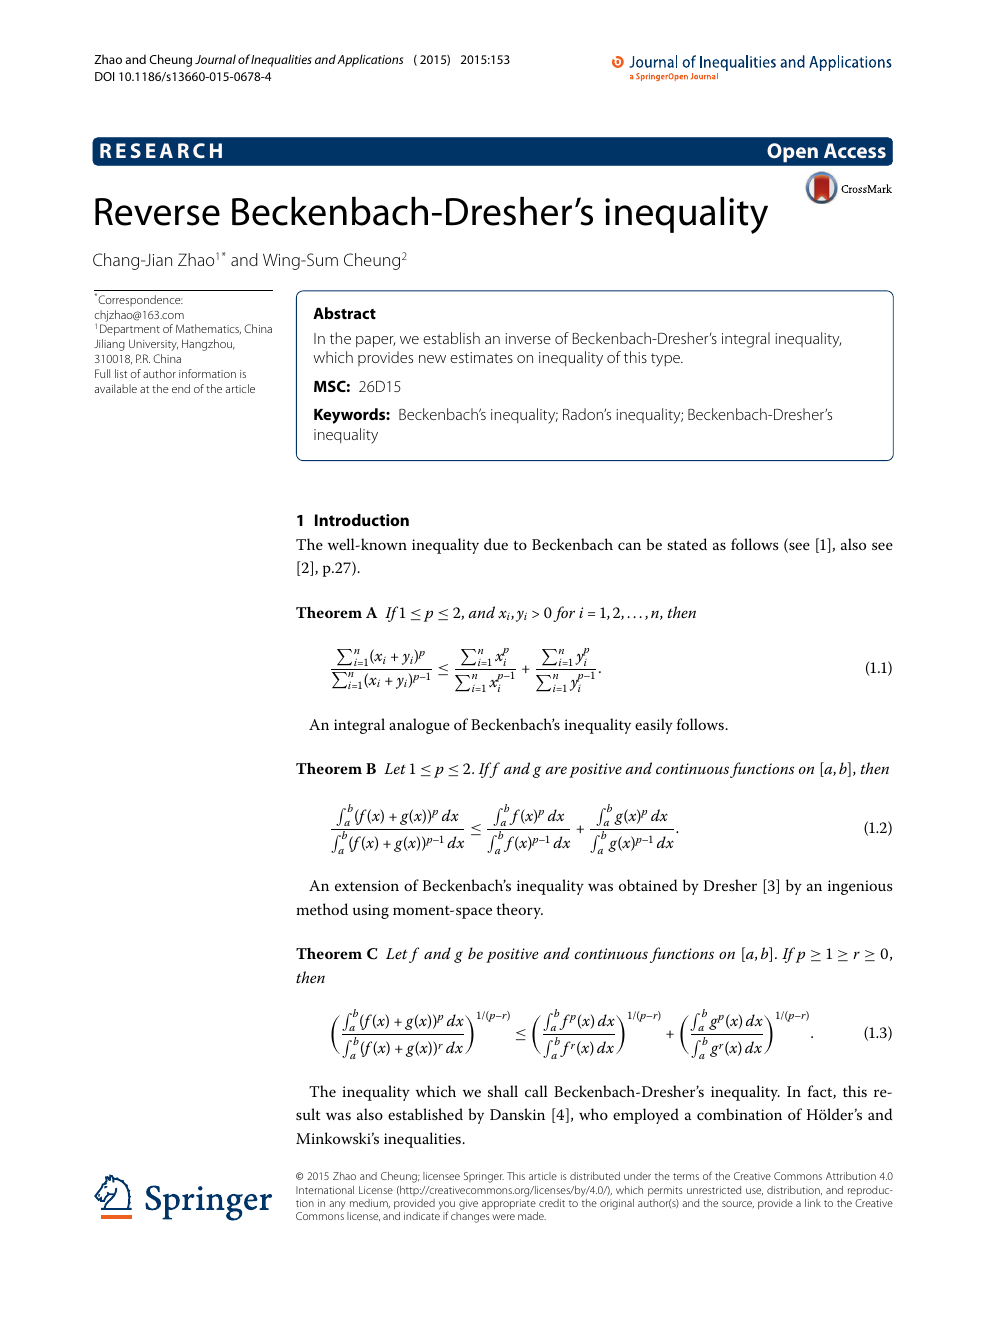 Reverse Beckenbach Dresher S Inequality Topic Of Research Paper In Mathematics Download Scholarly Article Pdf And Read For Free On Cyberleninka Open Science Hub